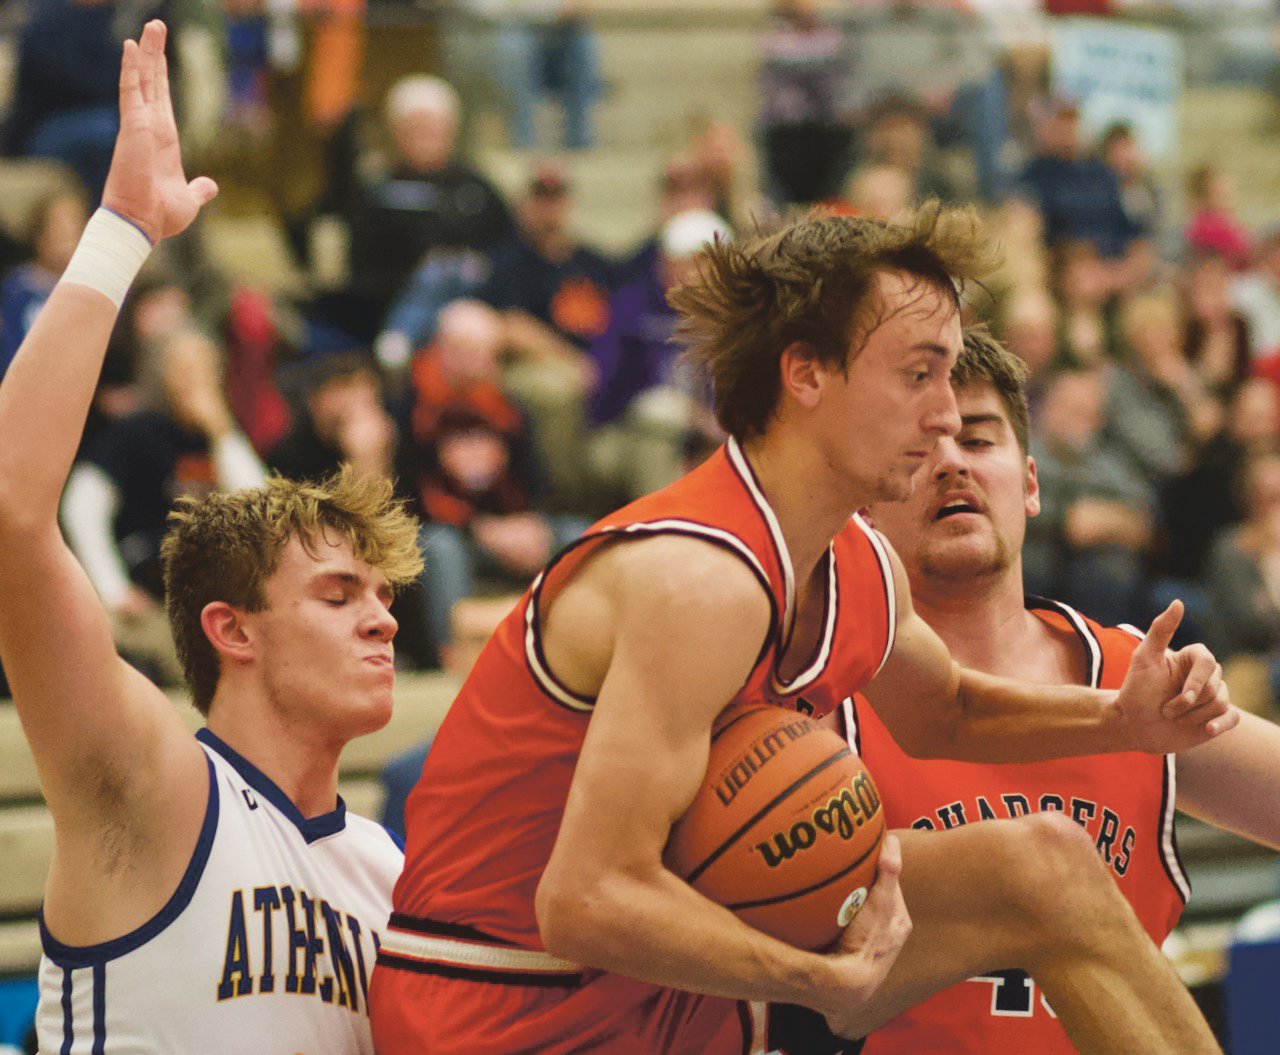 Kade Kobel grabs a rebound for the Chargers.